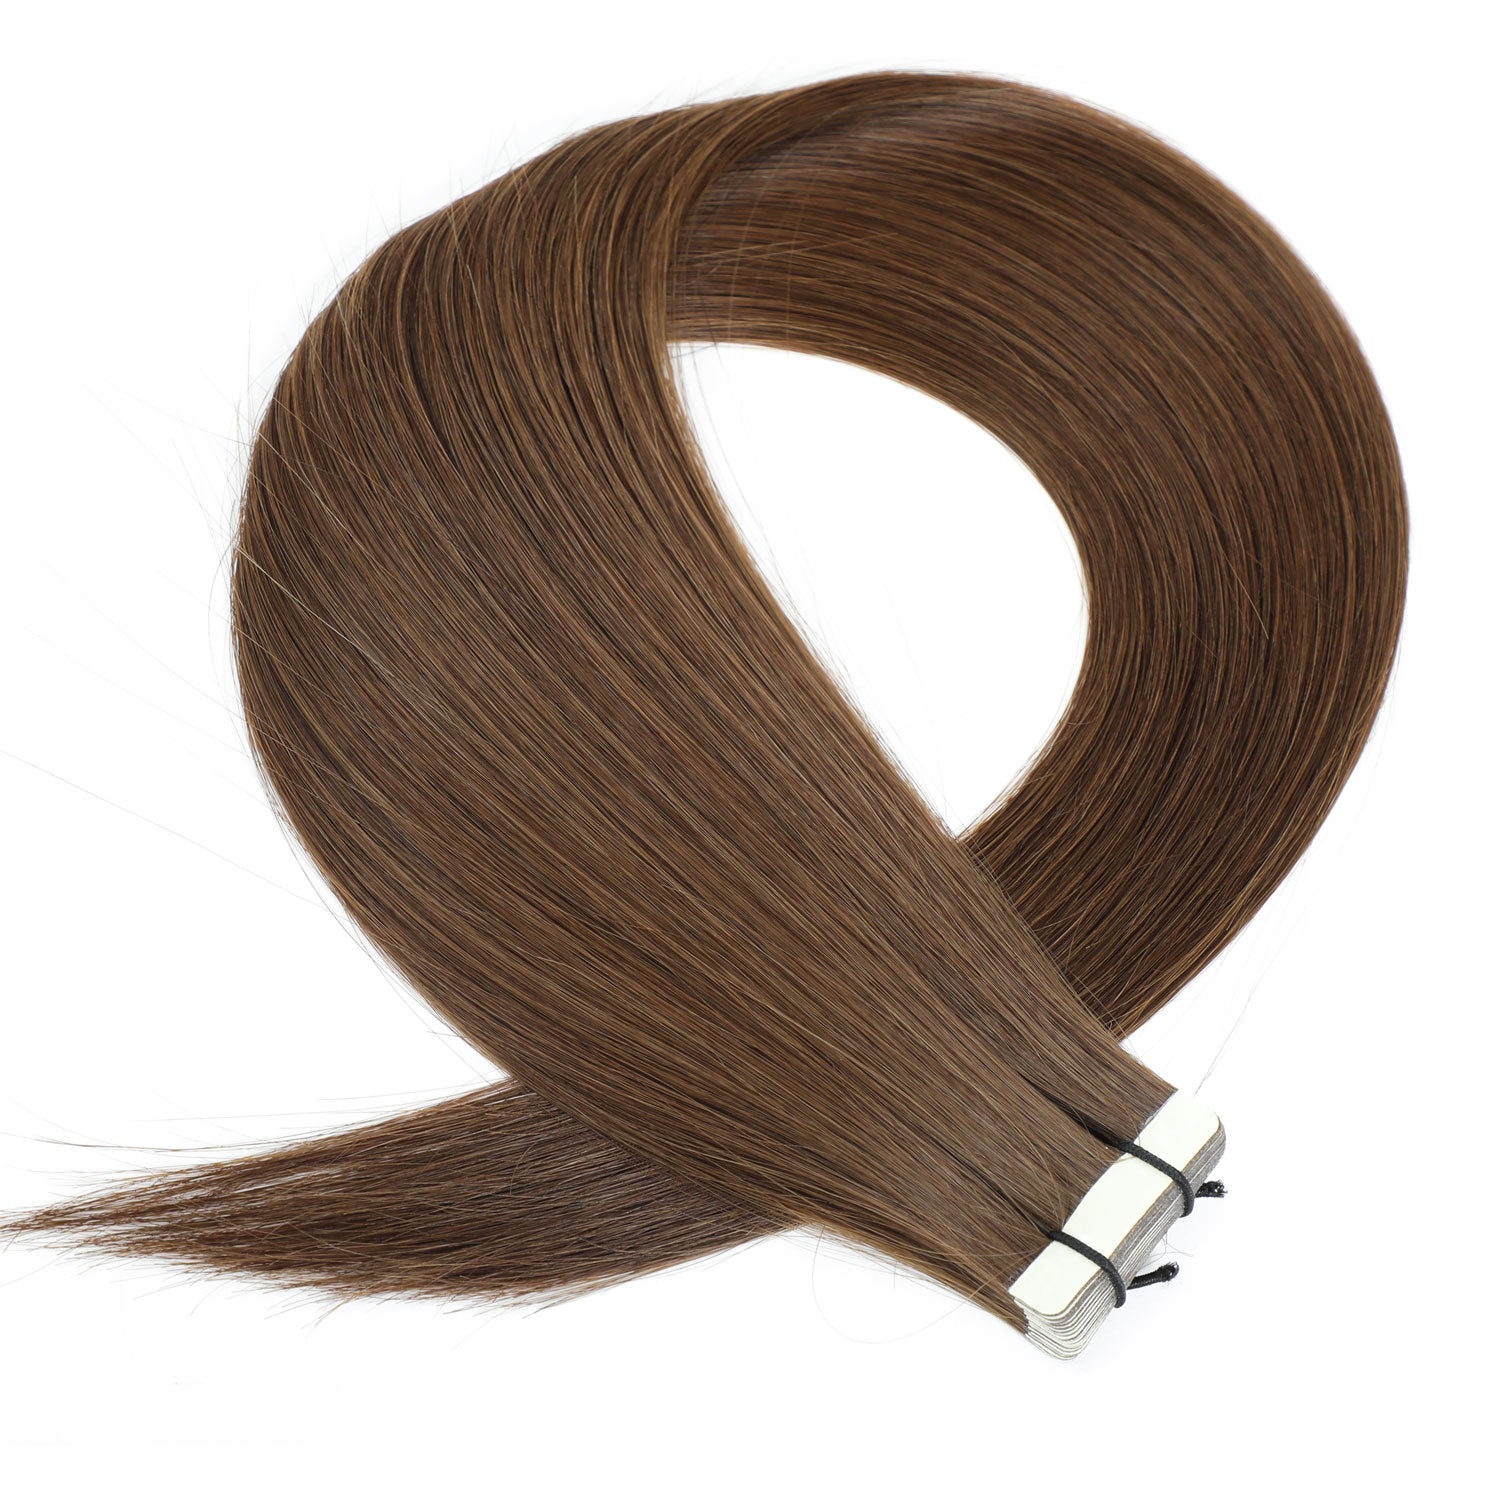 High-quality Human Hair Extensions provide a natural look and feel. These tape extensions are easy to apply and blend effortlessly with your natural hair for added length and volume.